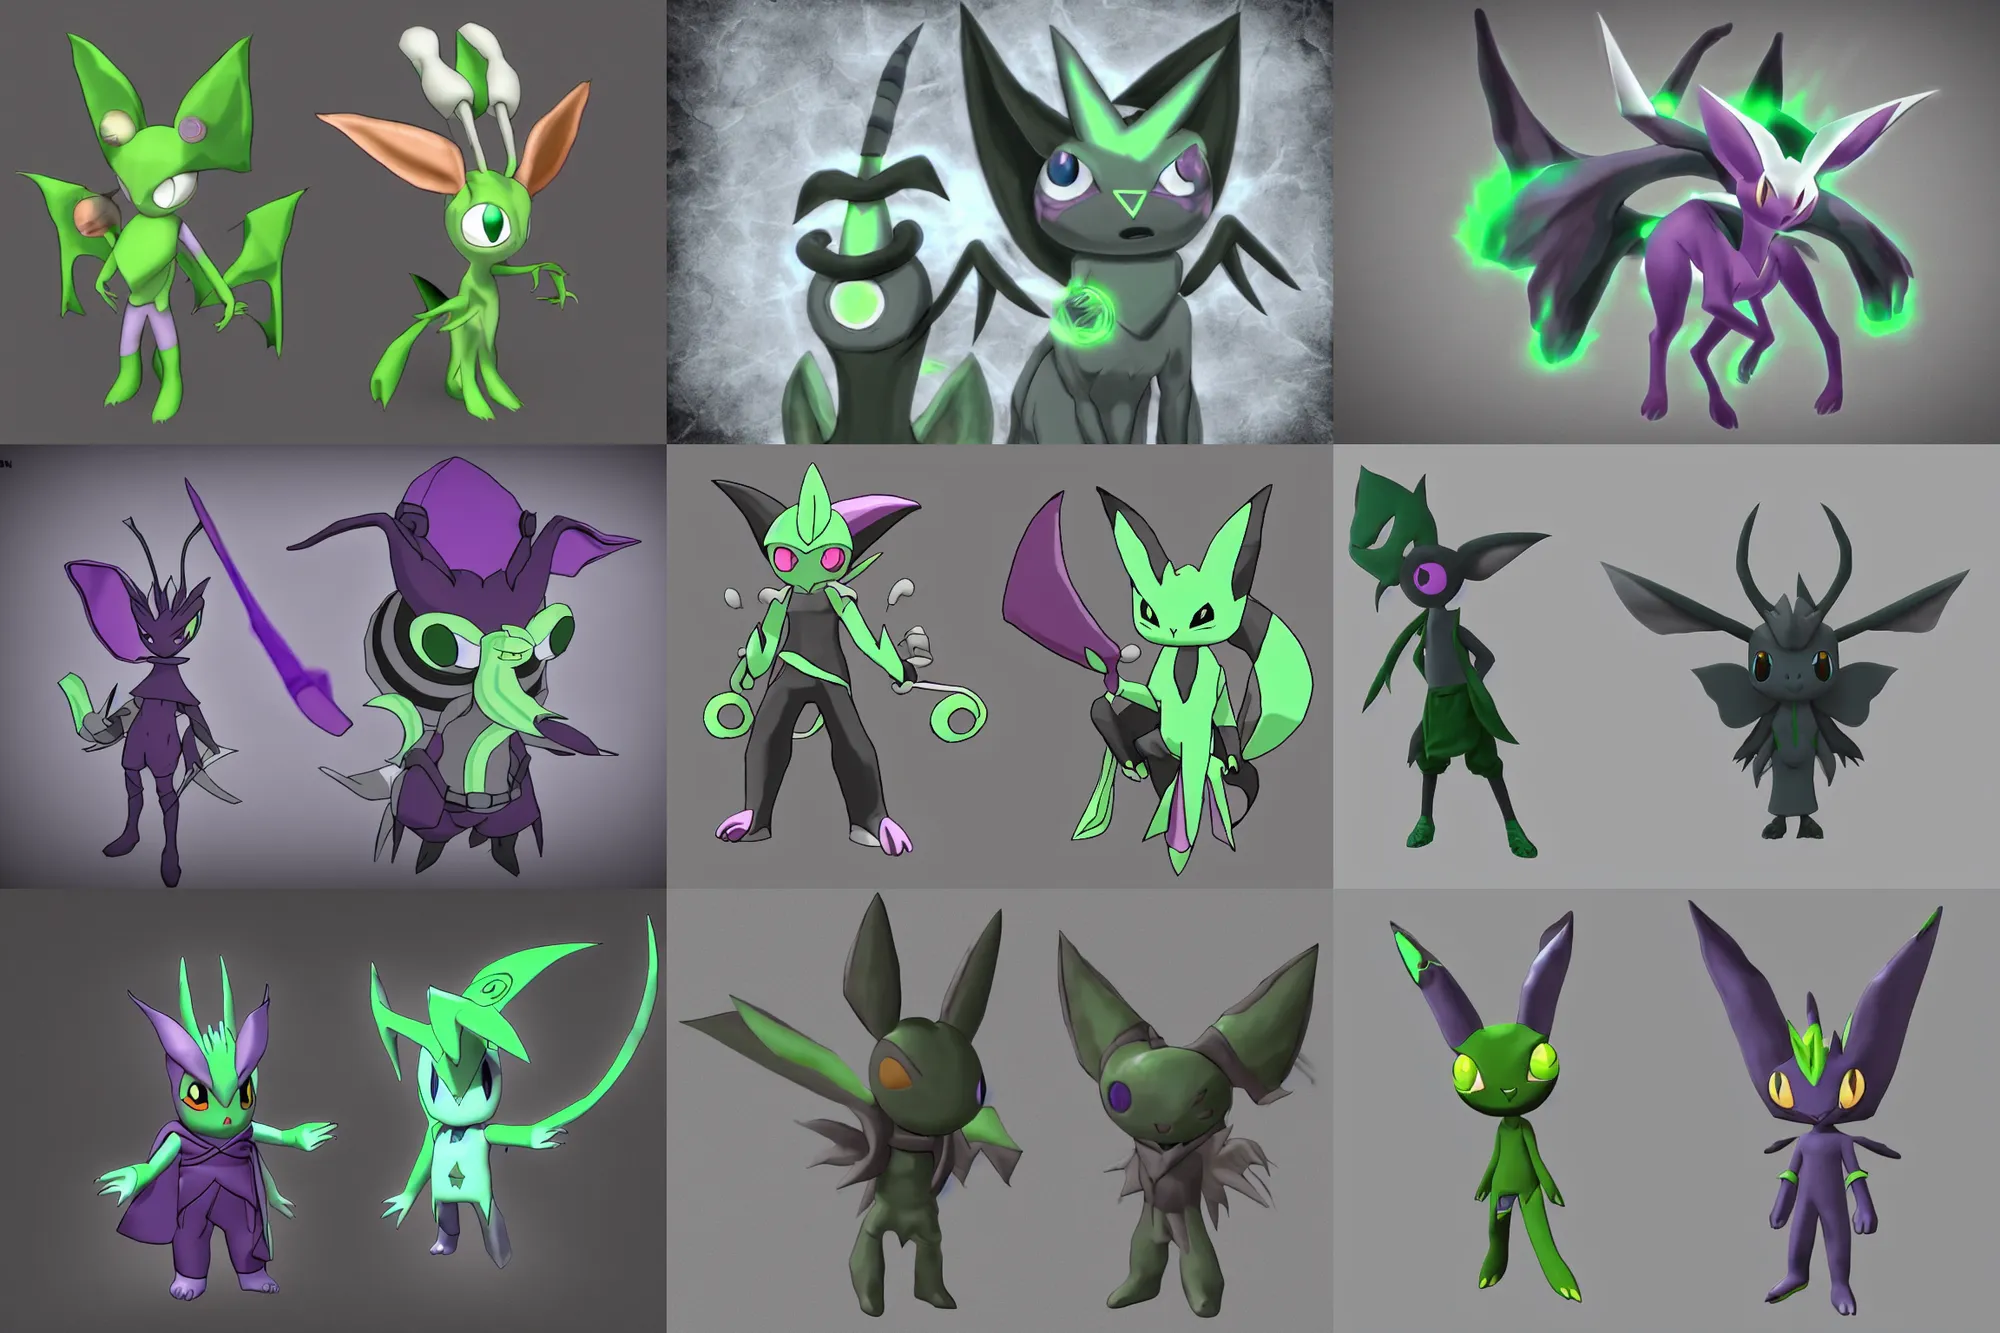 Prompt: grayscale low saturation video game elden clay celebi : espeons reprisal star valley resident evil mismagius oblivion mystery dungeon ultrahd resident eevee wearing bandanna fighting espeon, the old god wearing a witch hat pokemon final 3 d render